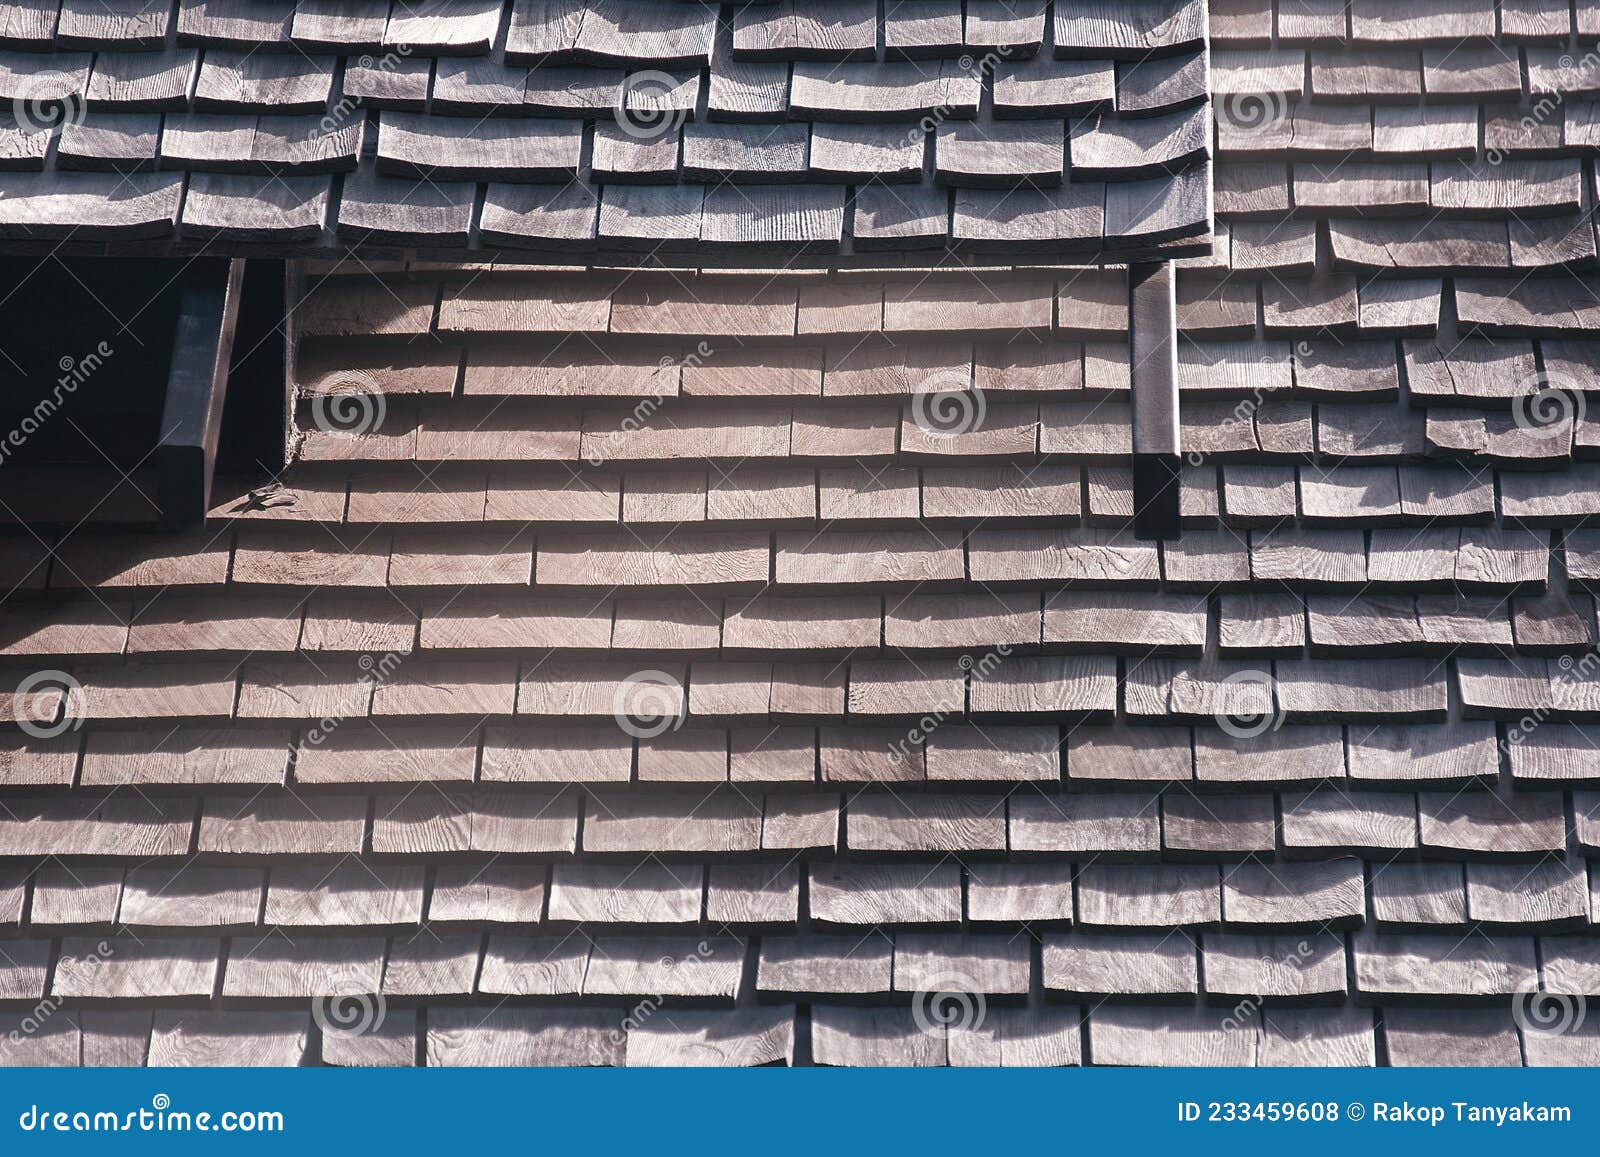 Wood Shingle Roof in Poor Repair, Traditional Wooden Roof Tile of Old ...